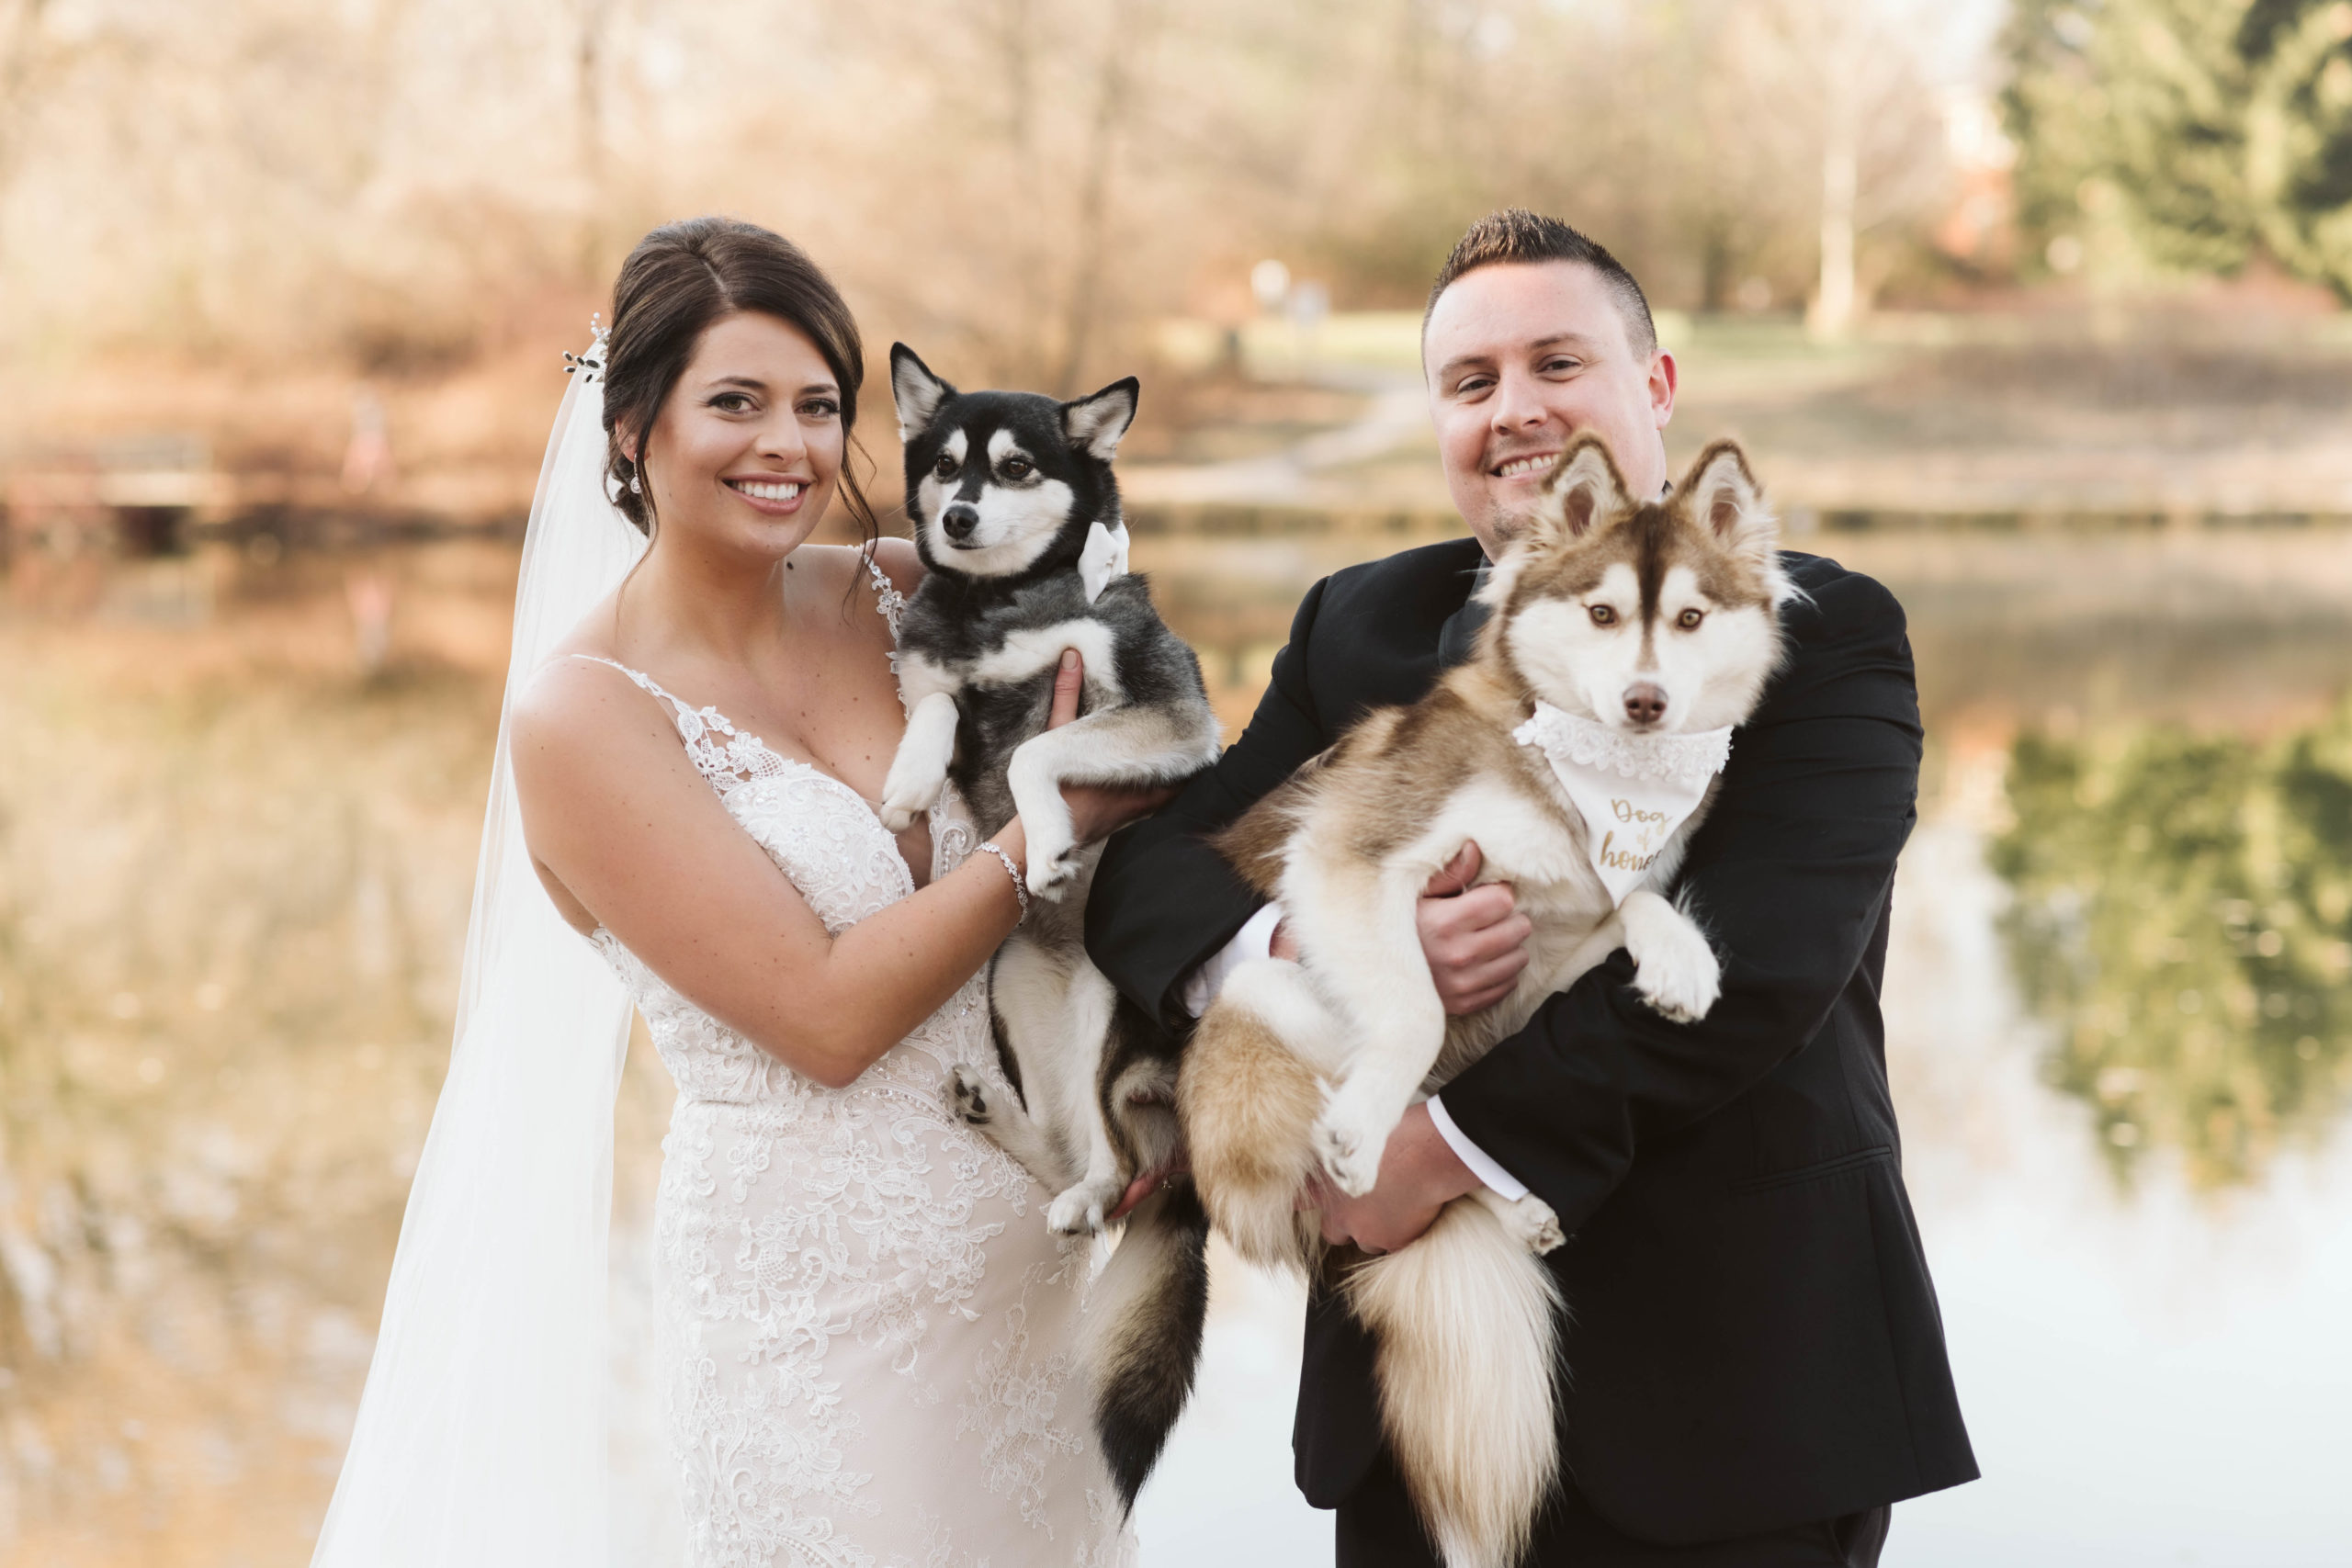 Bride and Groom with dogs